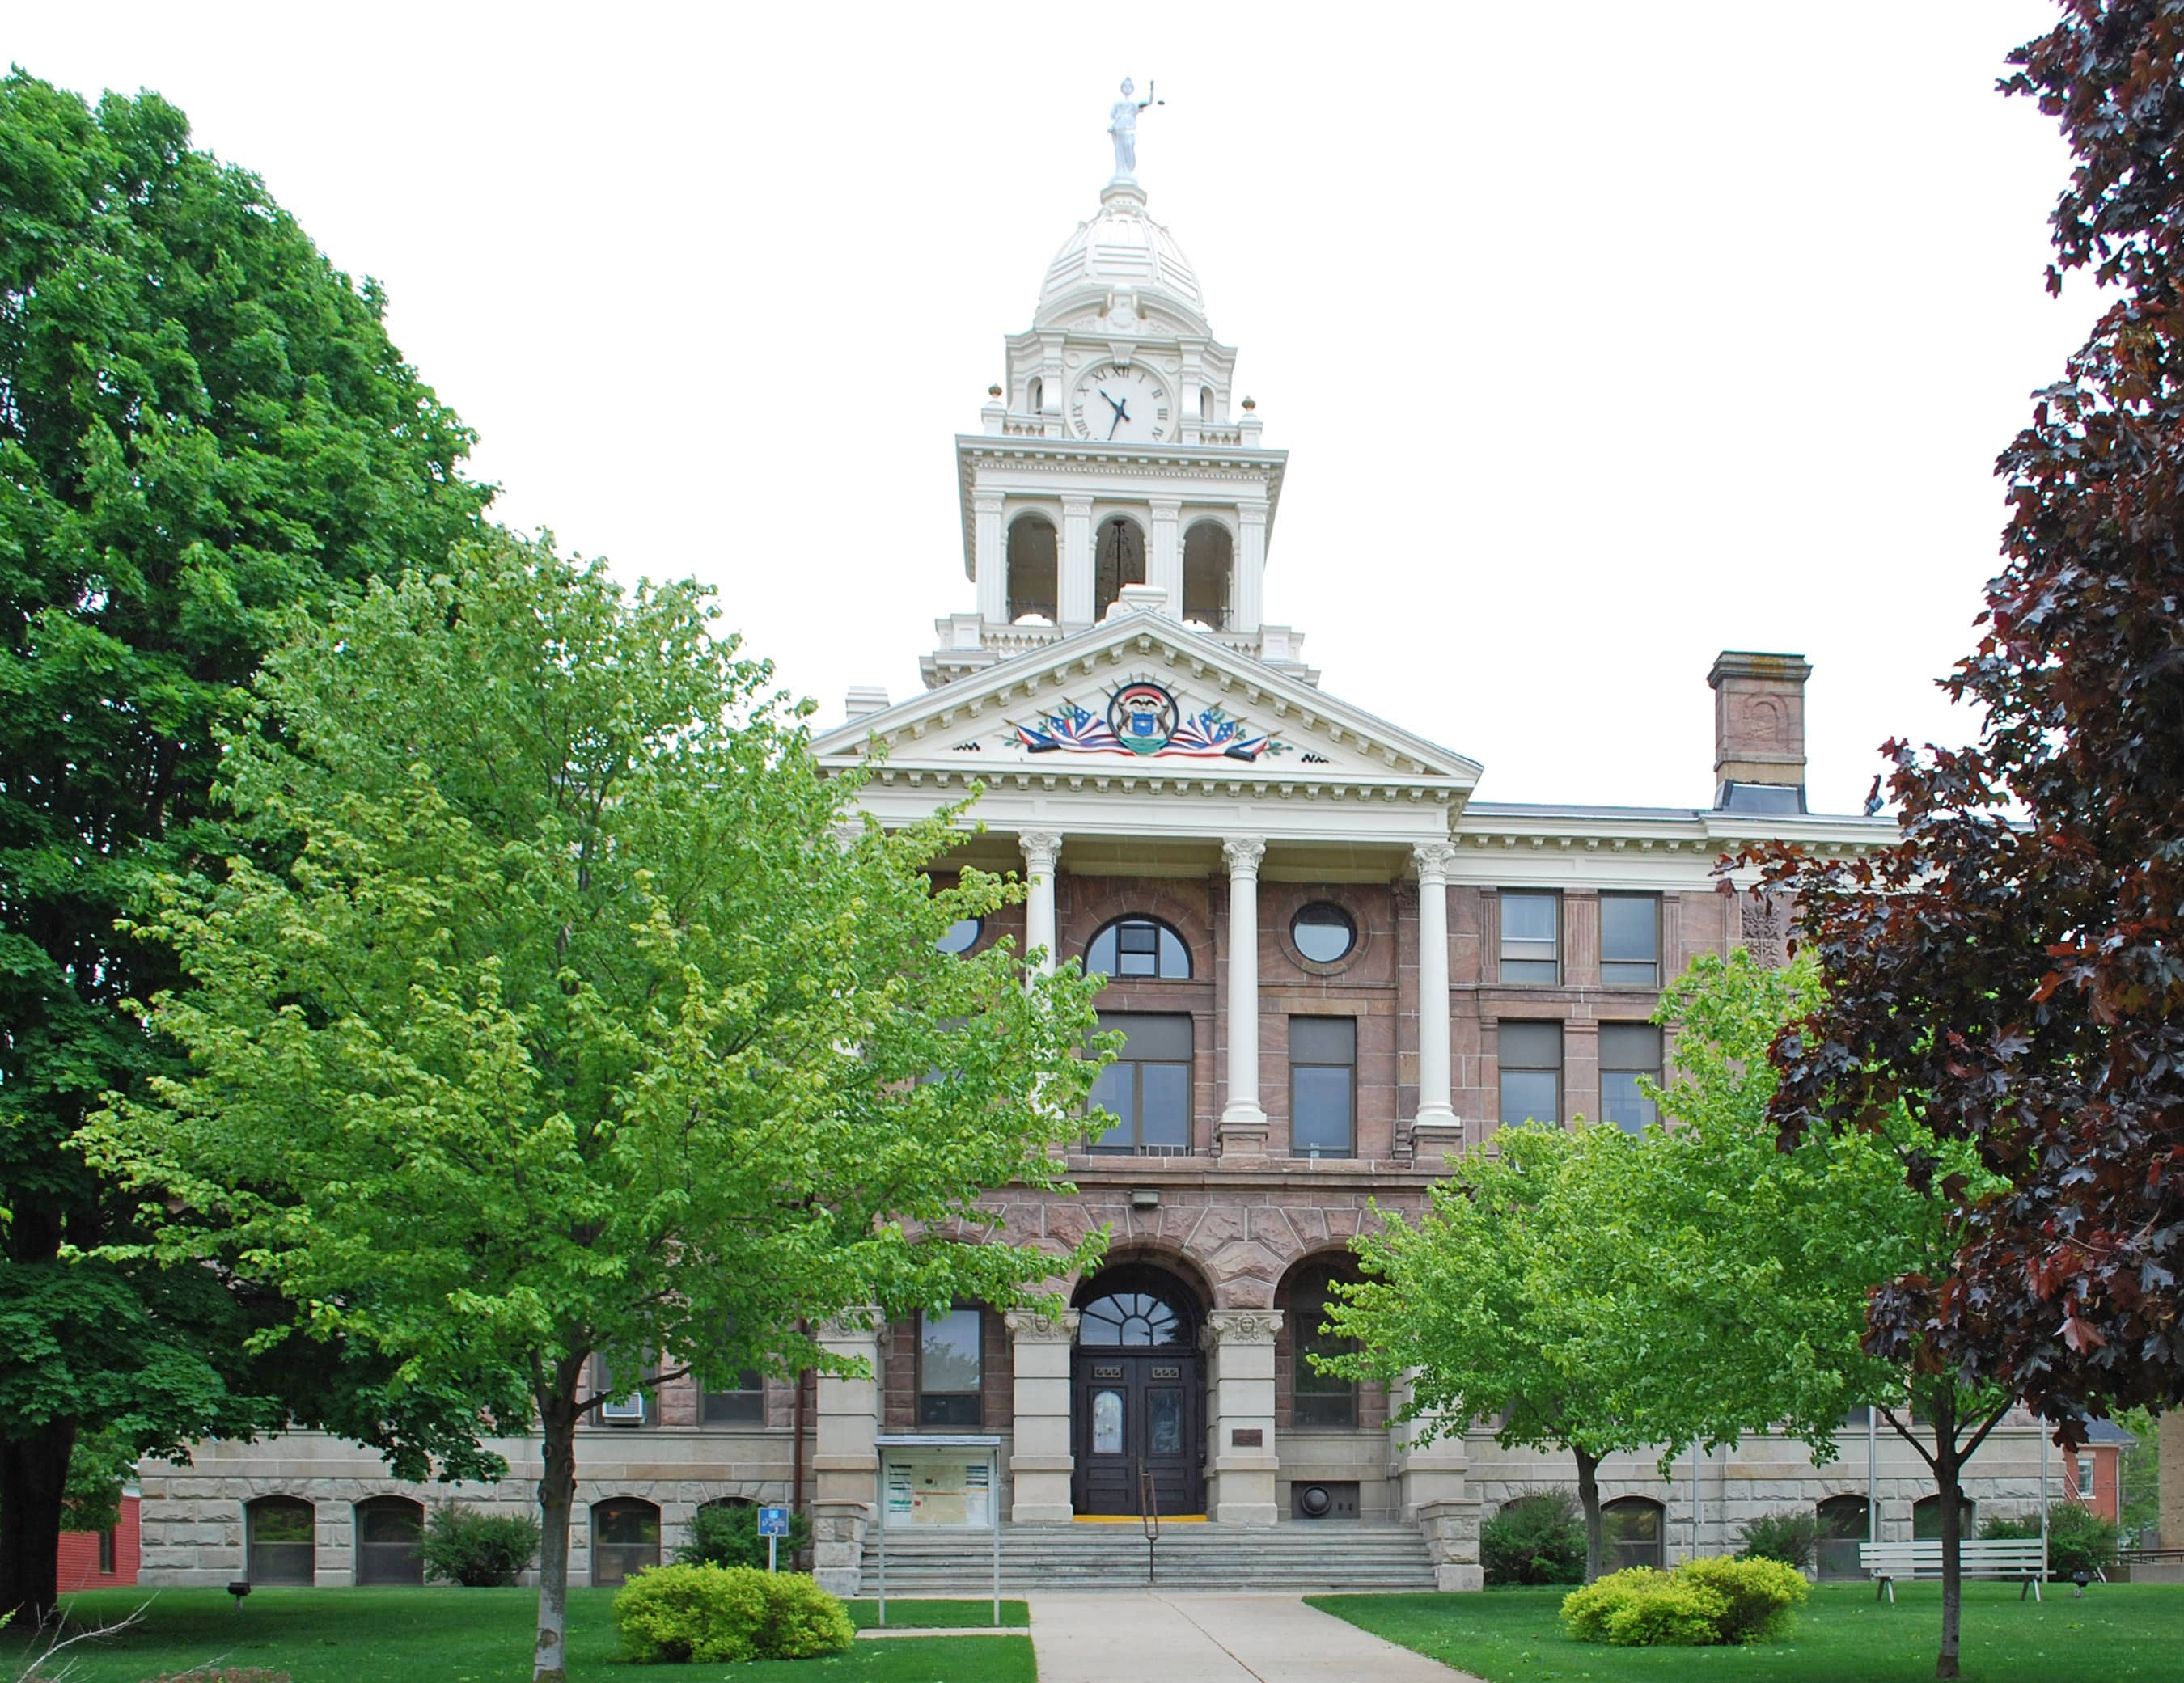 Image of Ionia County Sheriff Ionia County Courthouse